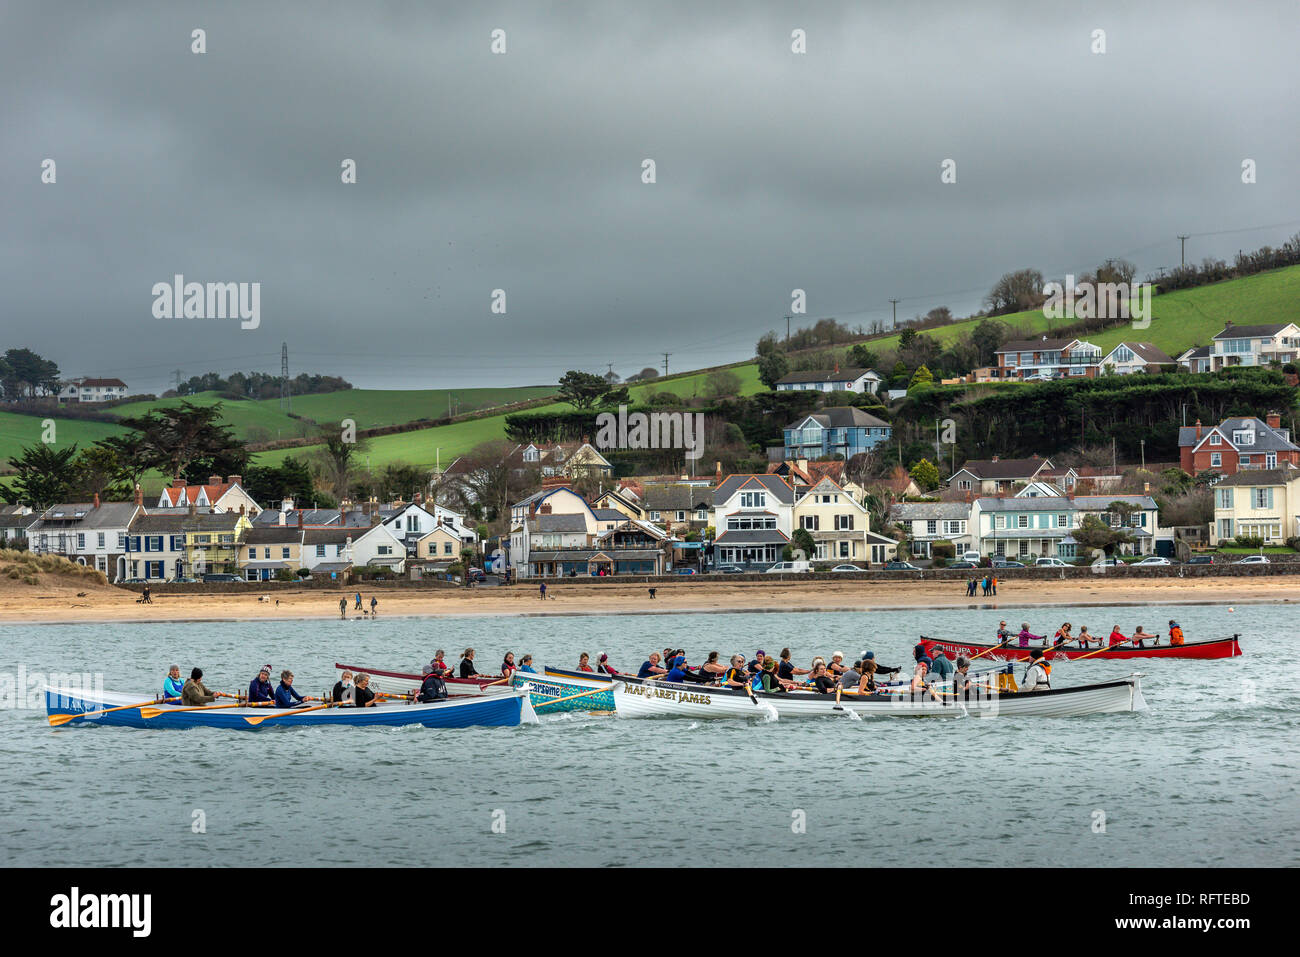 UK Weather - Saturday 26th January. On a cold overcast day in North Devon, Pilot Gig Boats gather at the quayside in the village of Appledore to do battle in the 'North Coast Gig League Series' on the River Torridge. Stock Photo